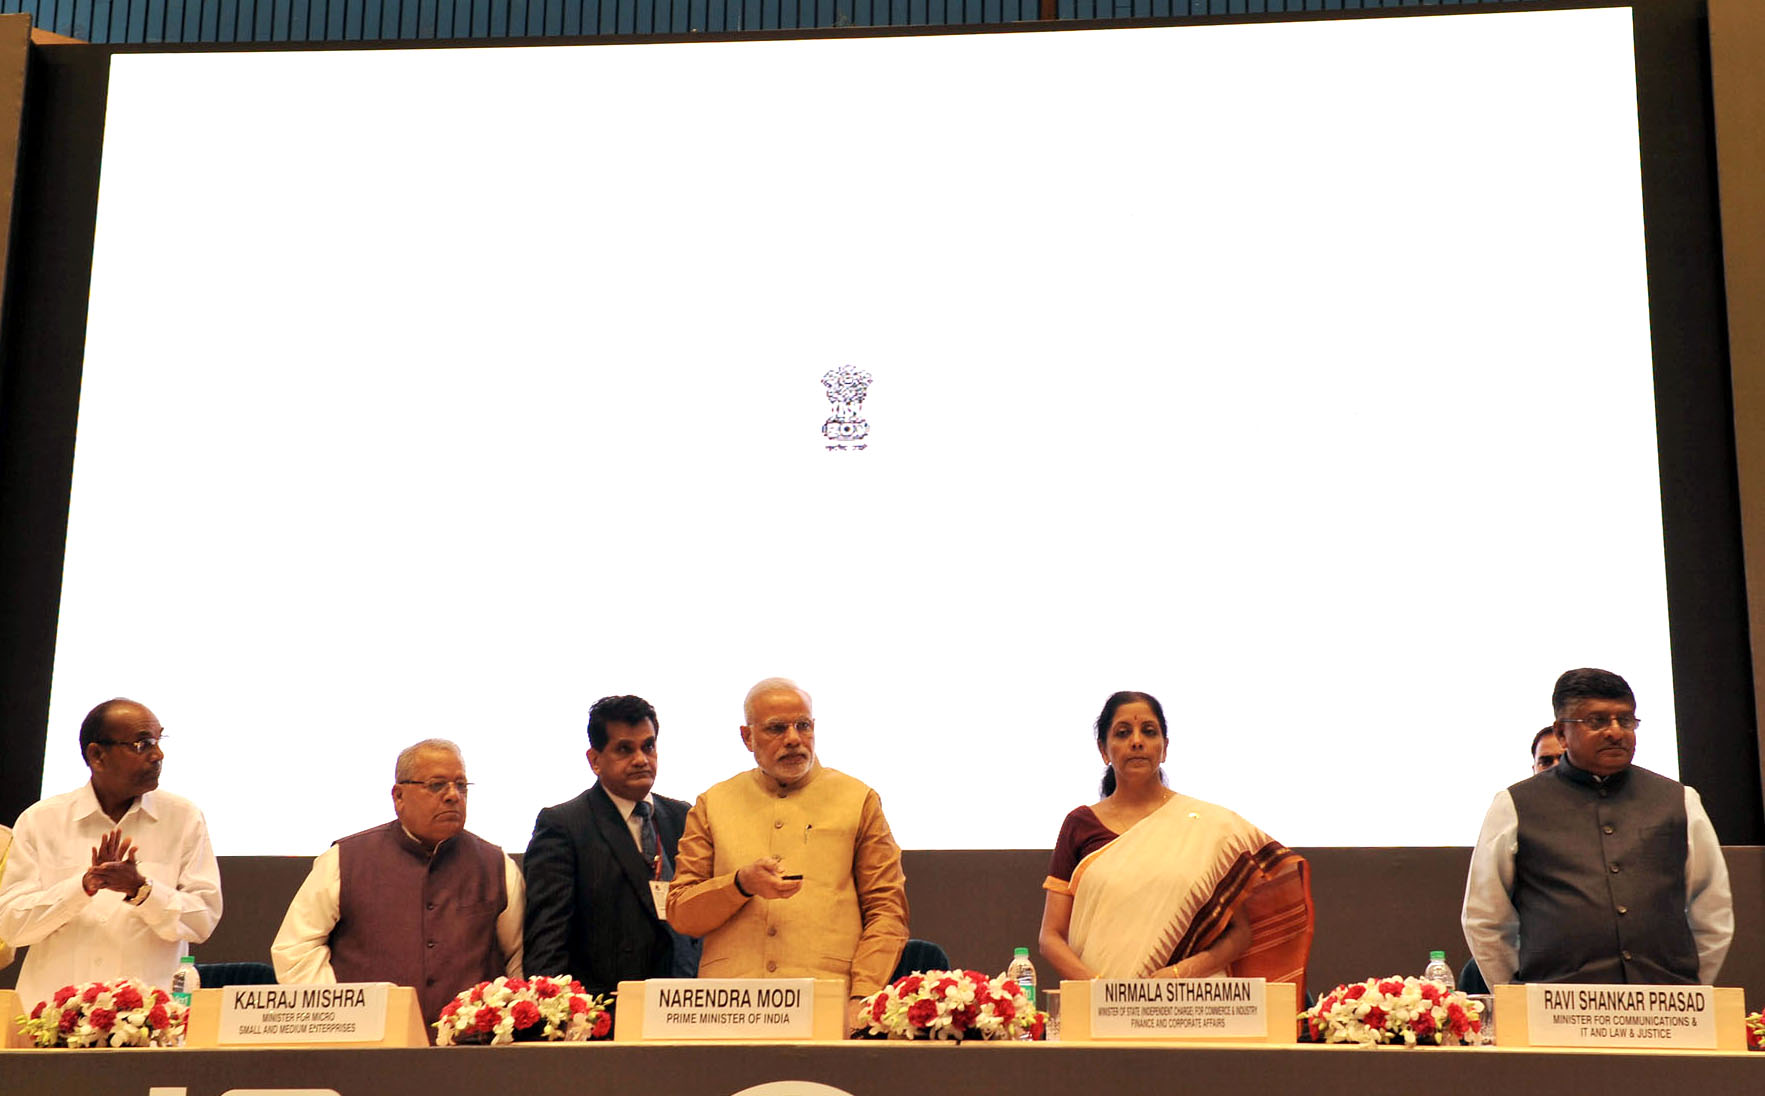  Modi releasing the logo at the inauguration of the â€œMAKE IN INDIAâ€